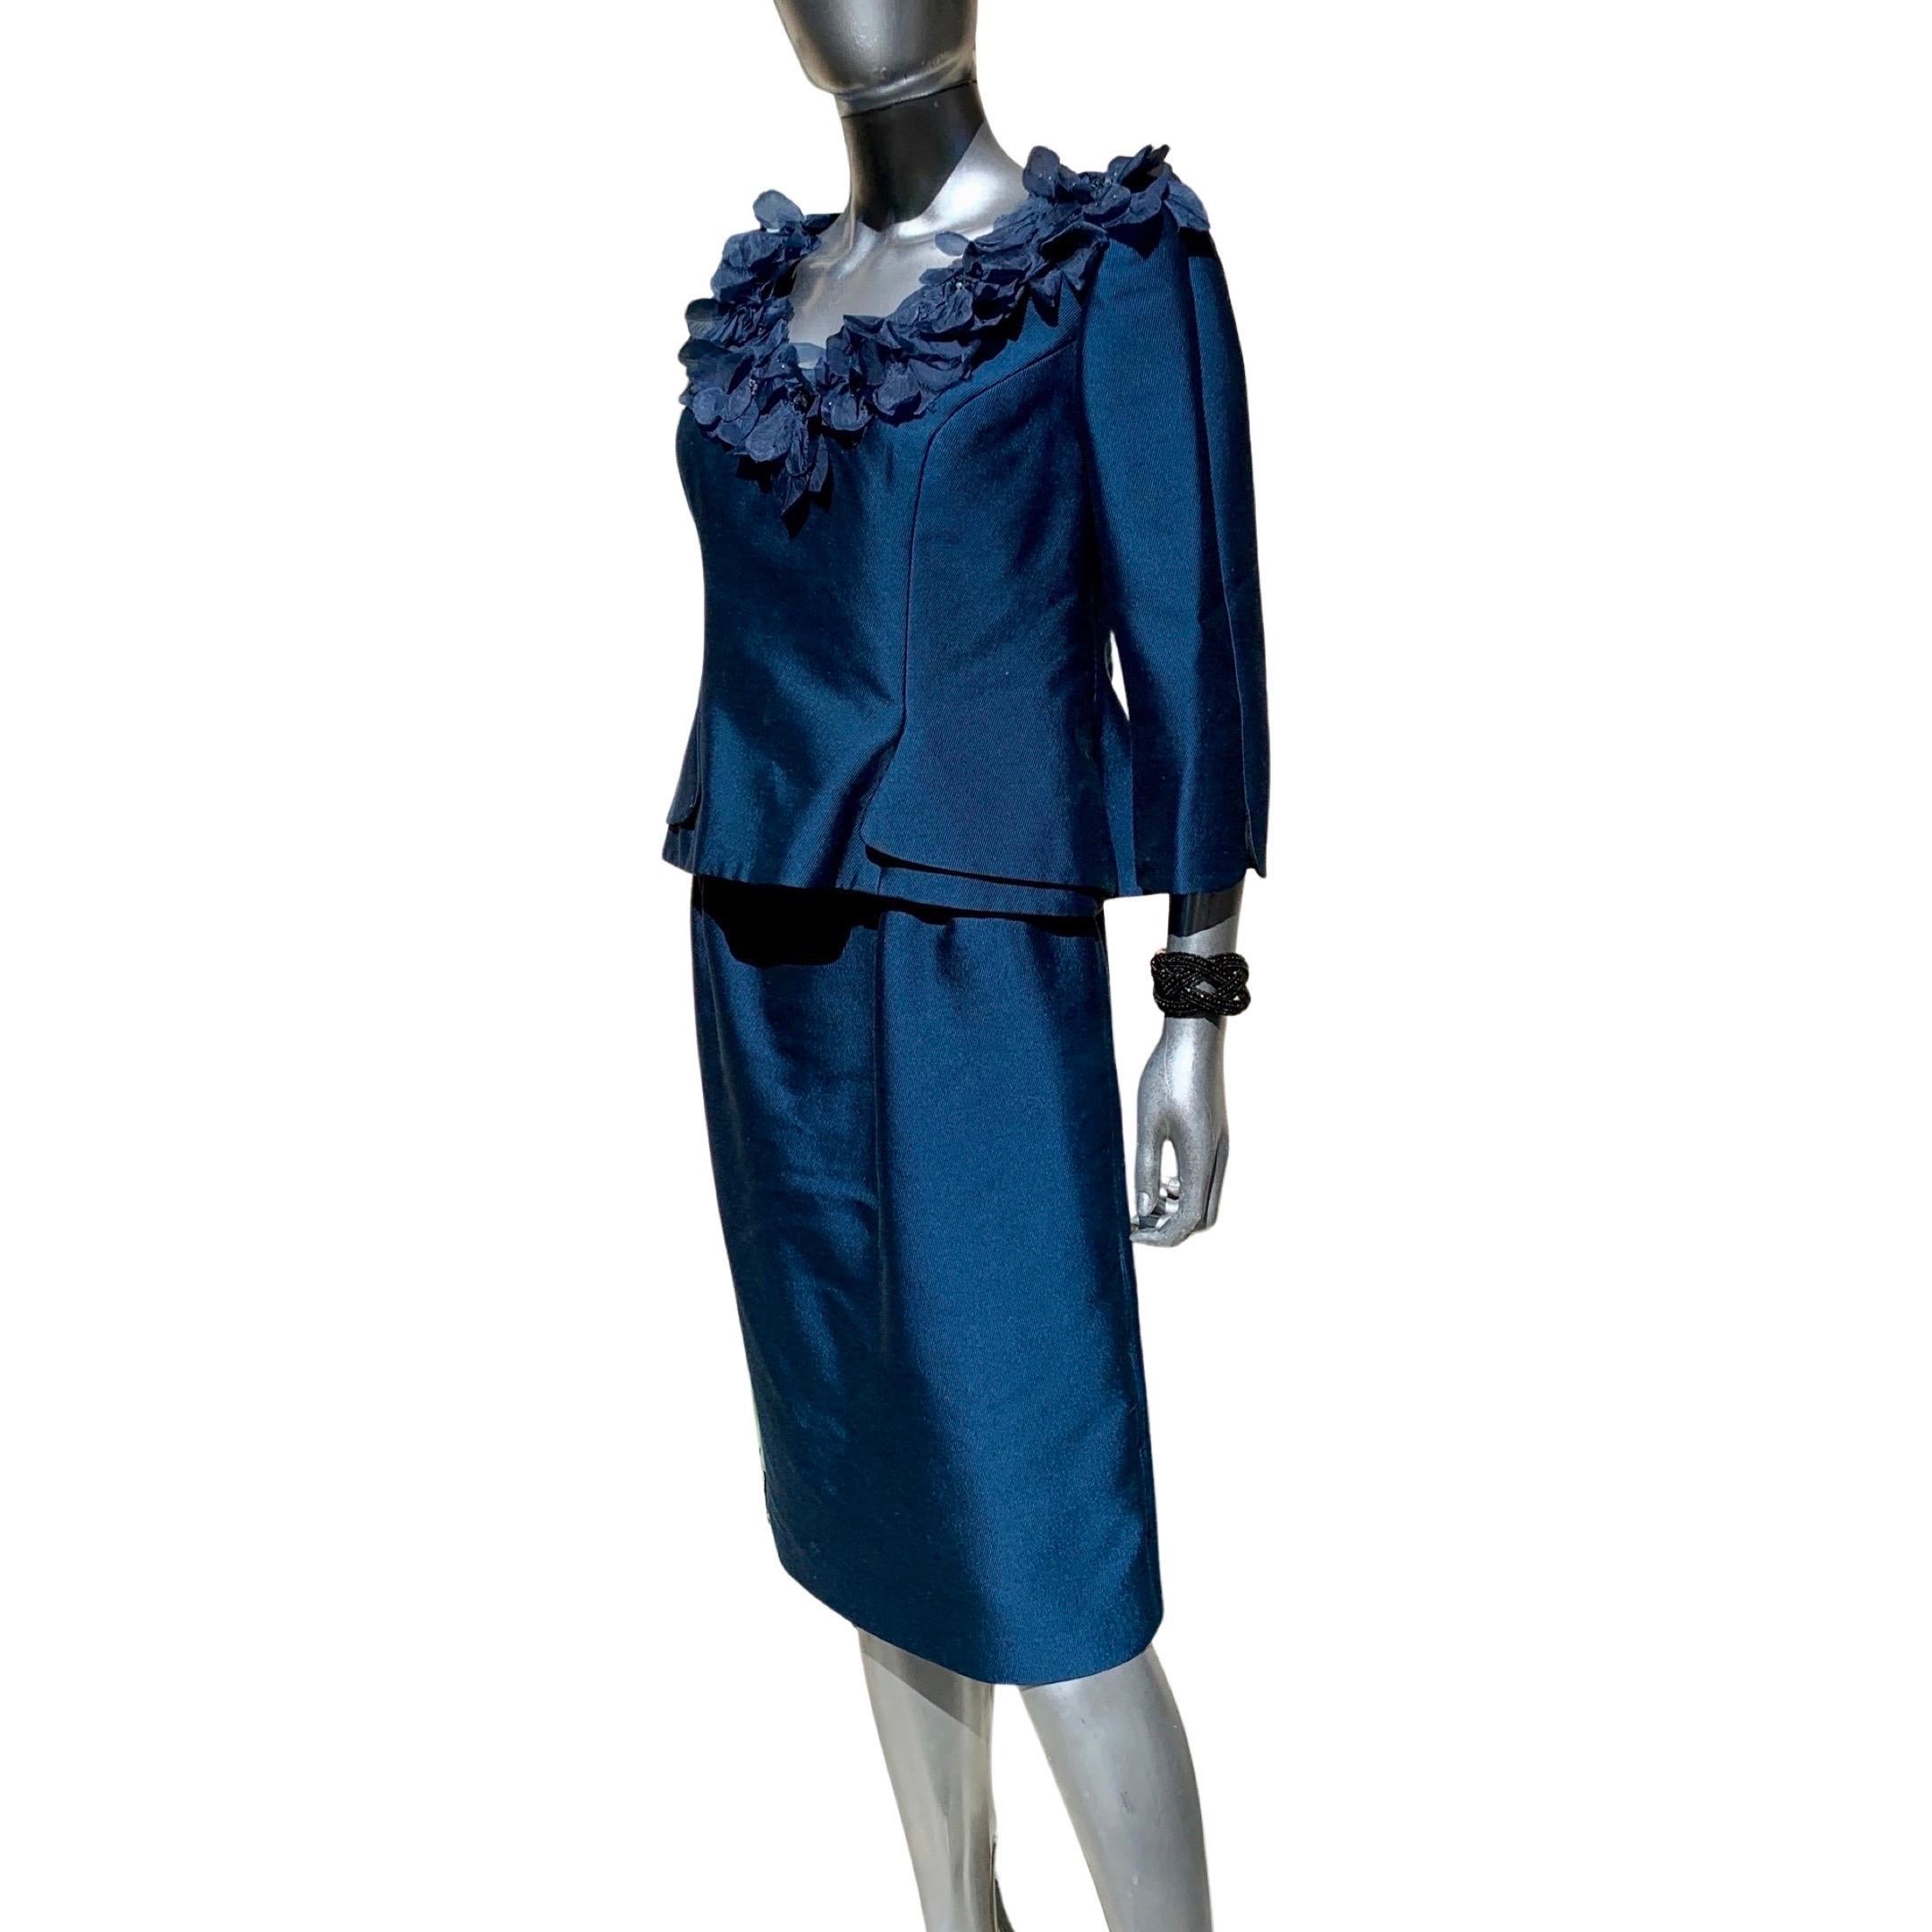 Three Piece Saphire Blue Couture Evening Ensemble by Lily Samii SF Size 8 For Sale 3